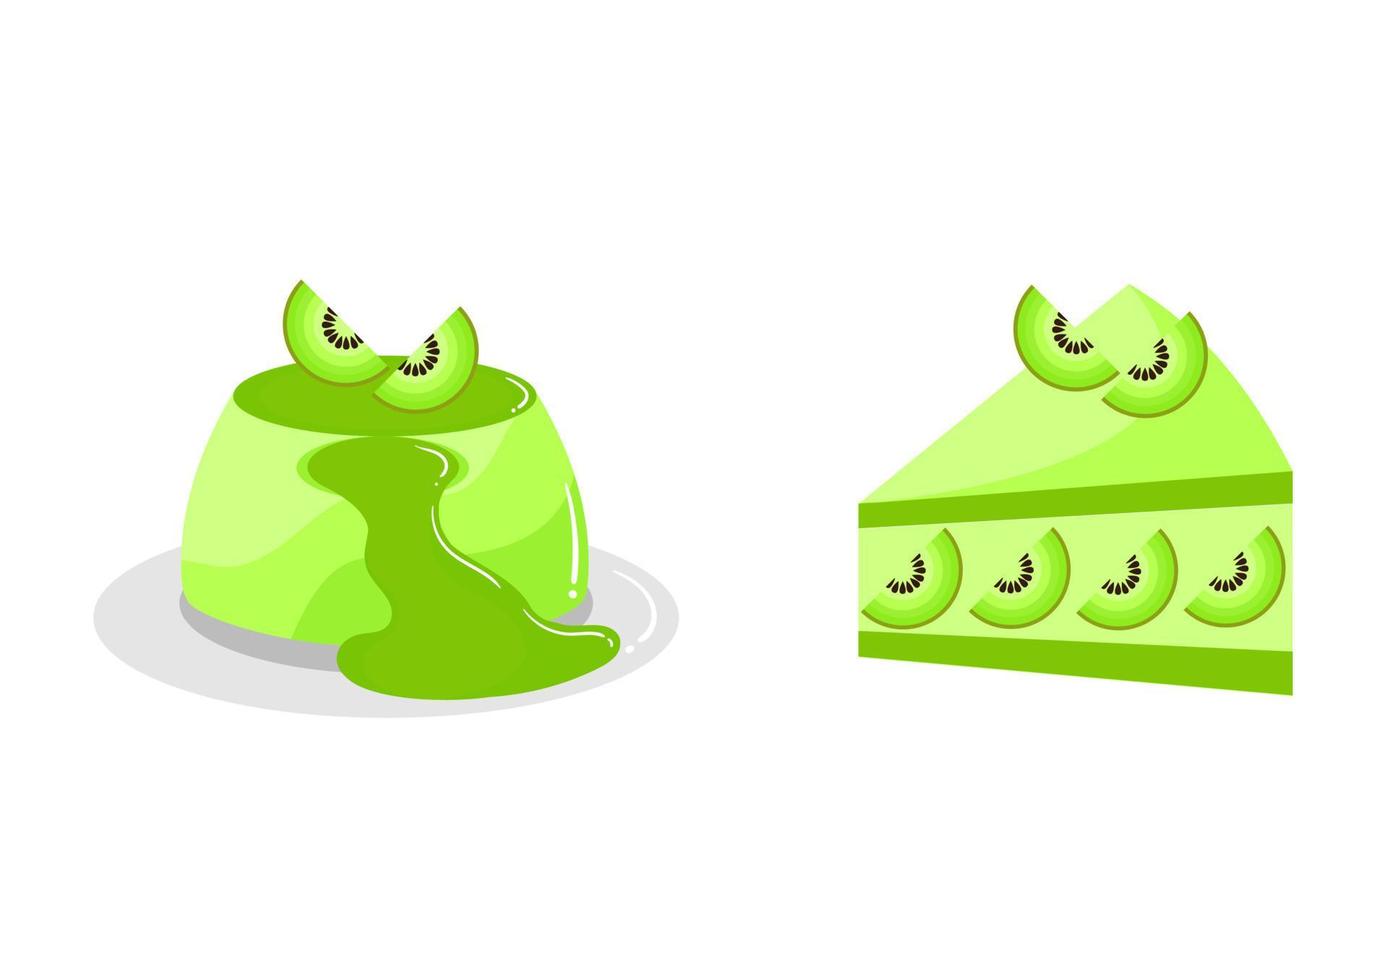 cake and pudding illustration with kiwi fruit flavor vector